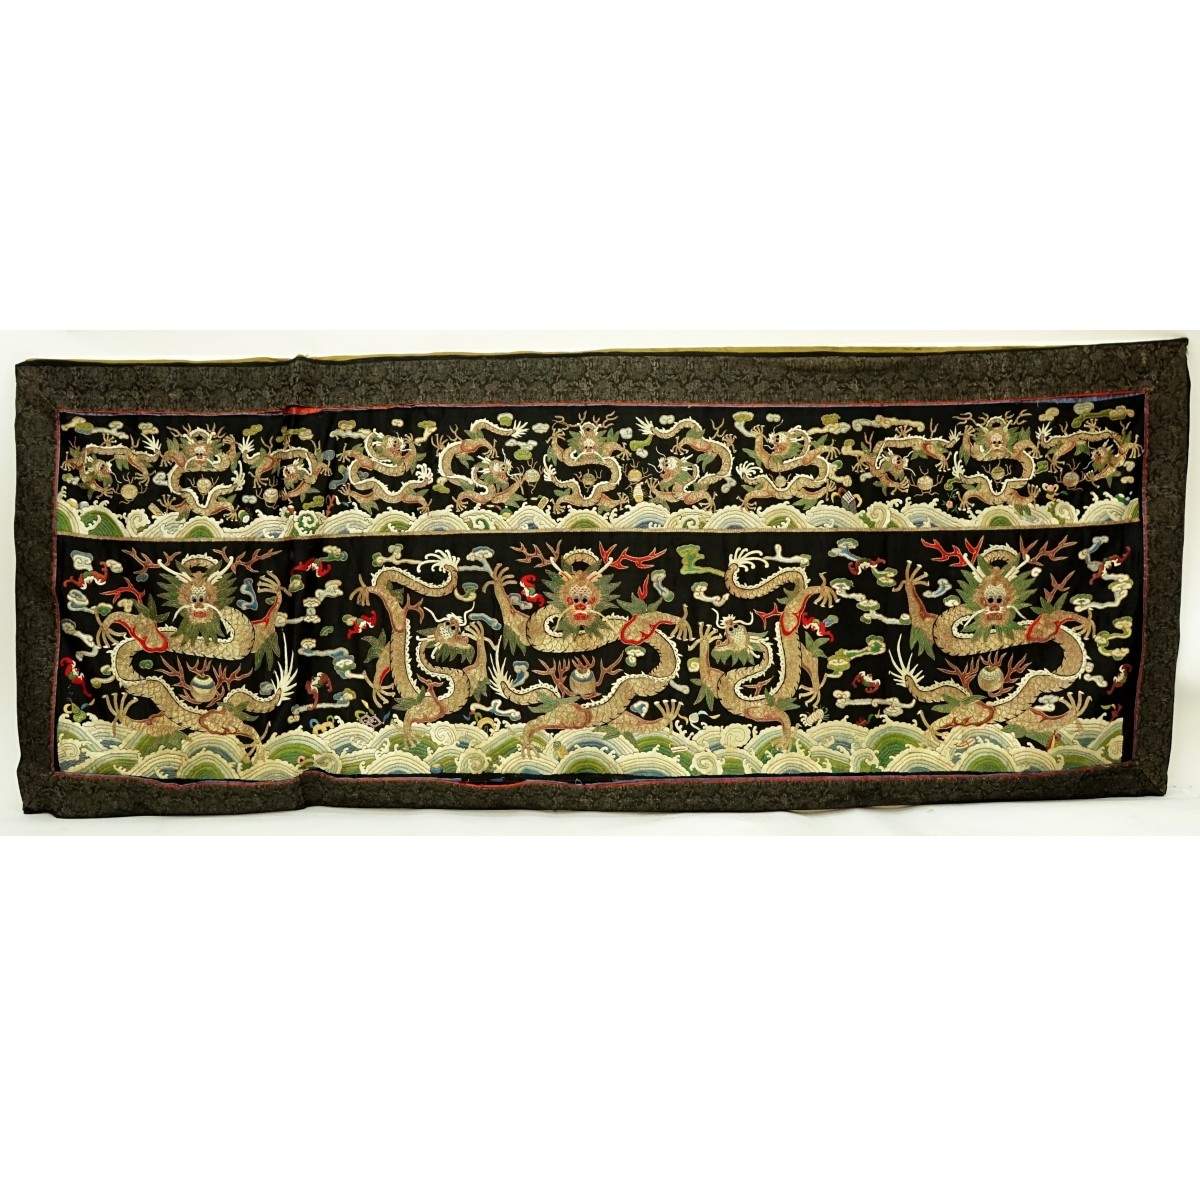 Fine Quality Antique Chinese Silk Embroidery